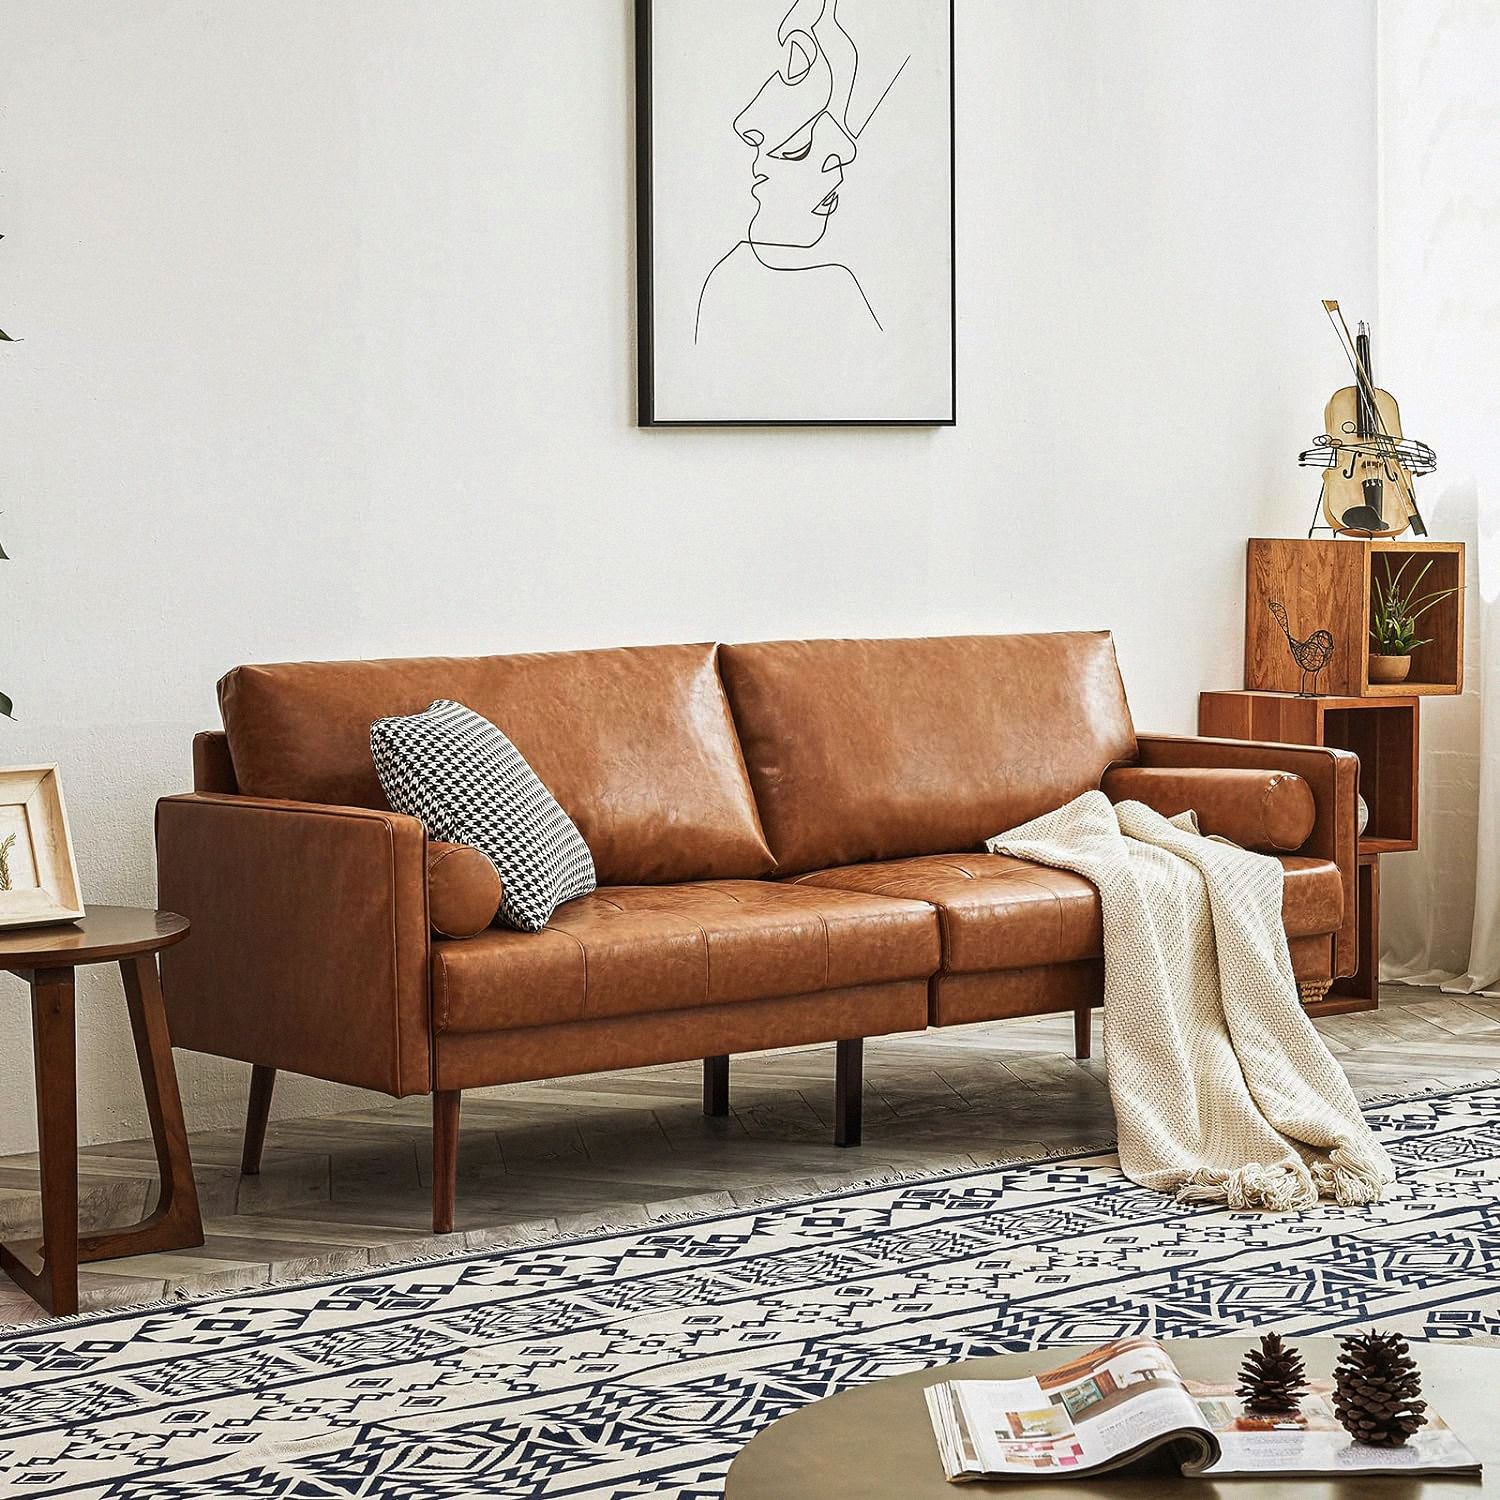 These Are the Best under-$1,000 Couches the Internet Has to Offer